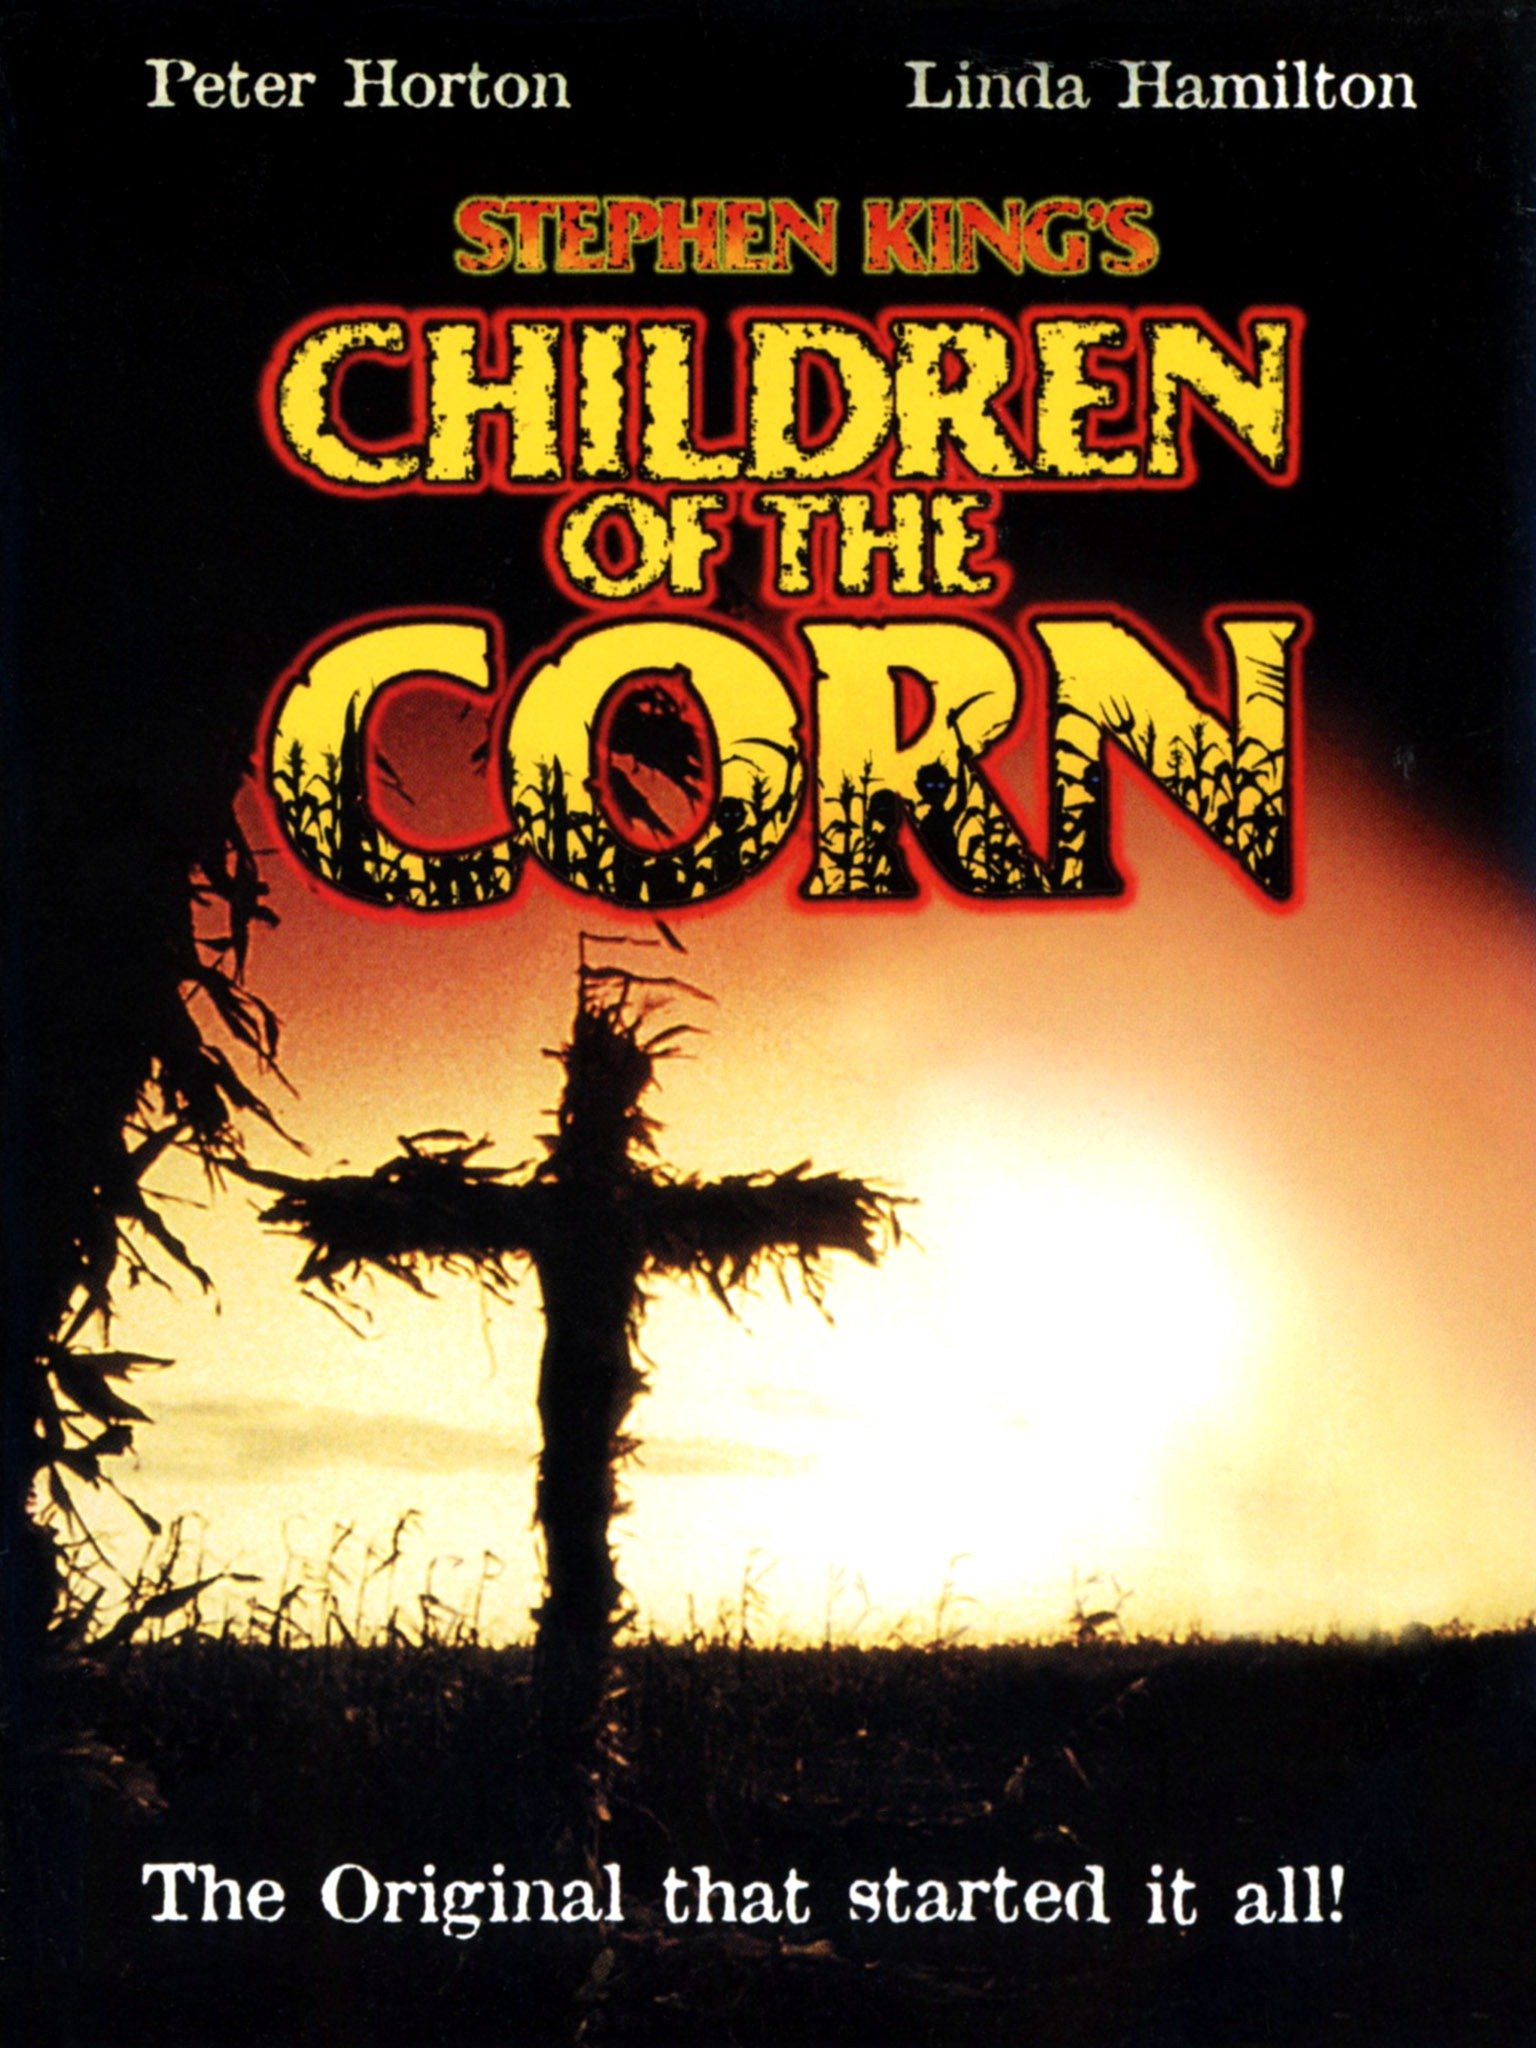 Children of the Corn Trailer 1 Trailers & Videos Rotten Tomatoes